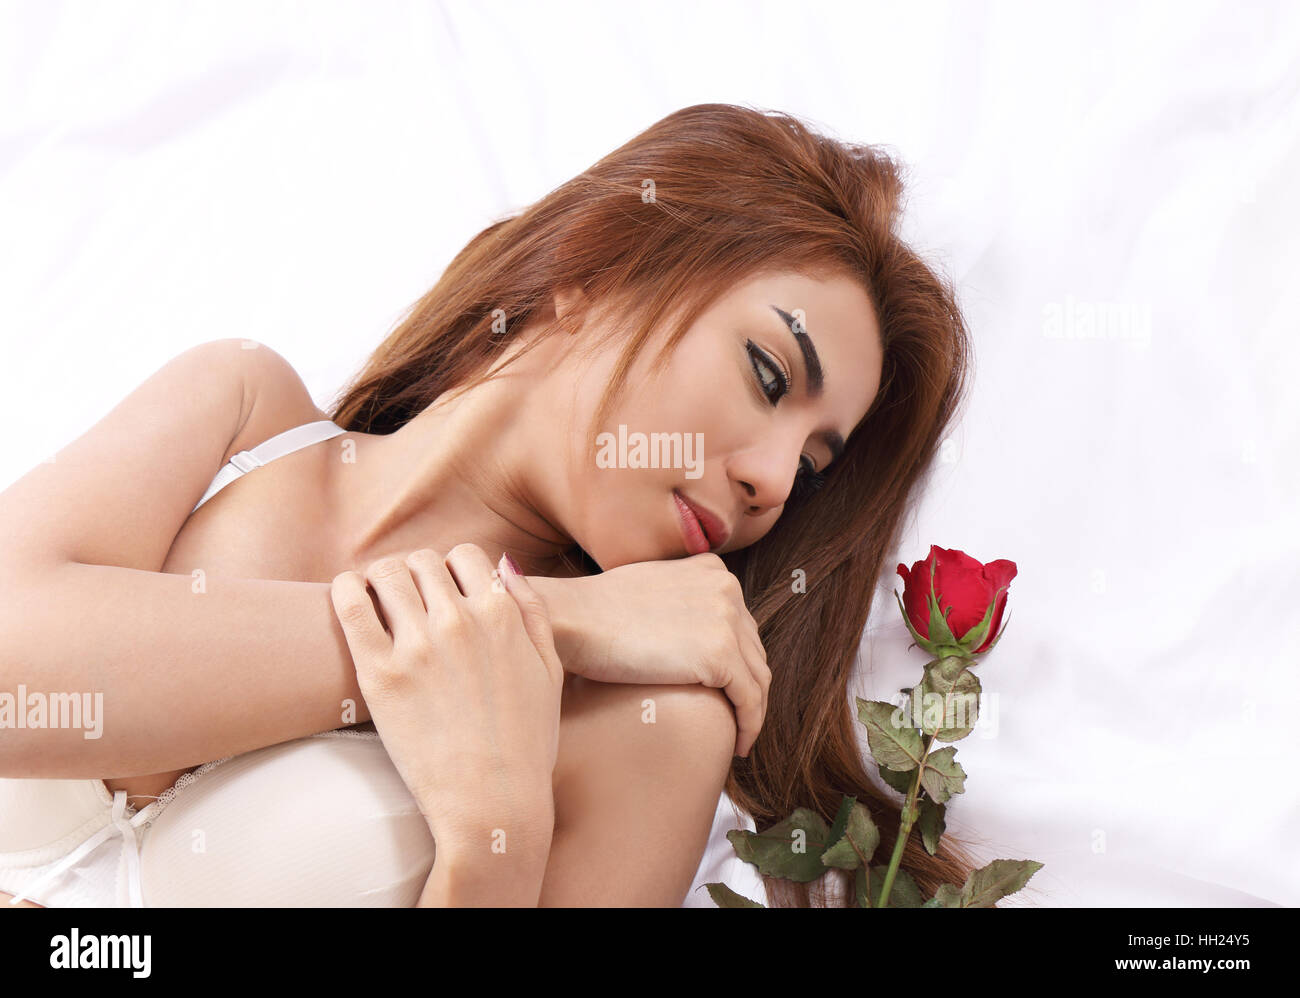 closeup image of beautiful woman and red rose on white background Stock Photo